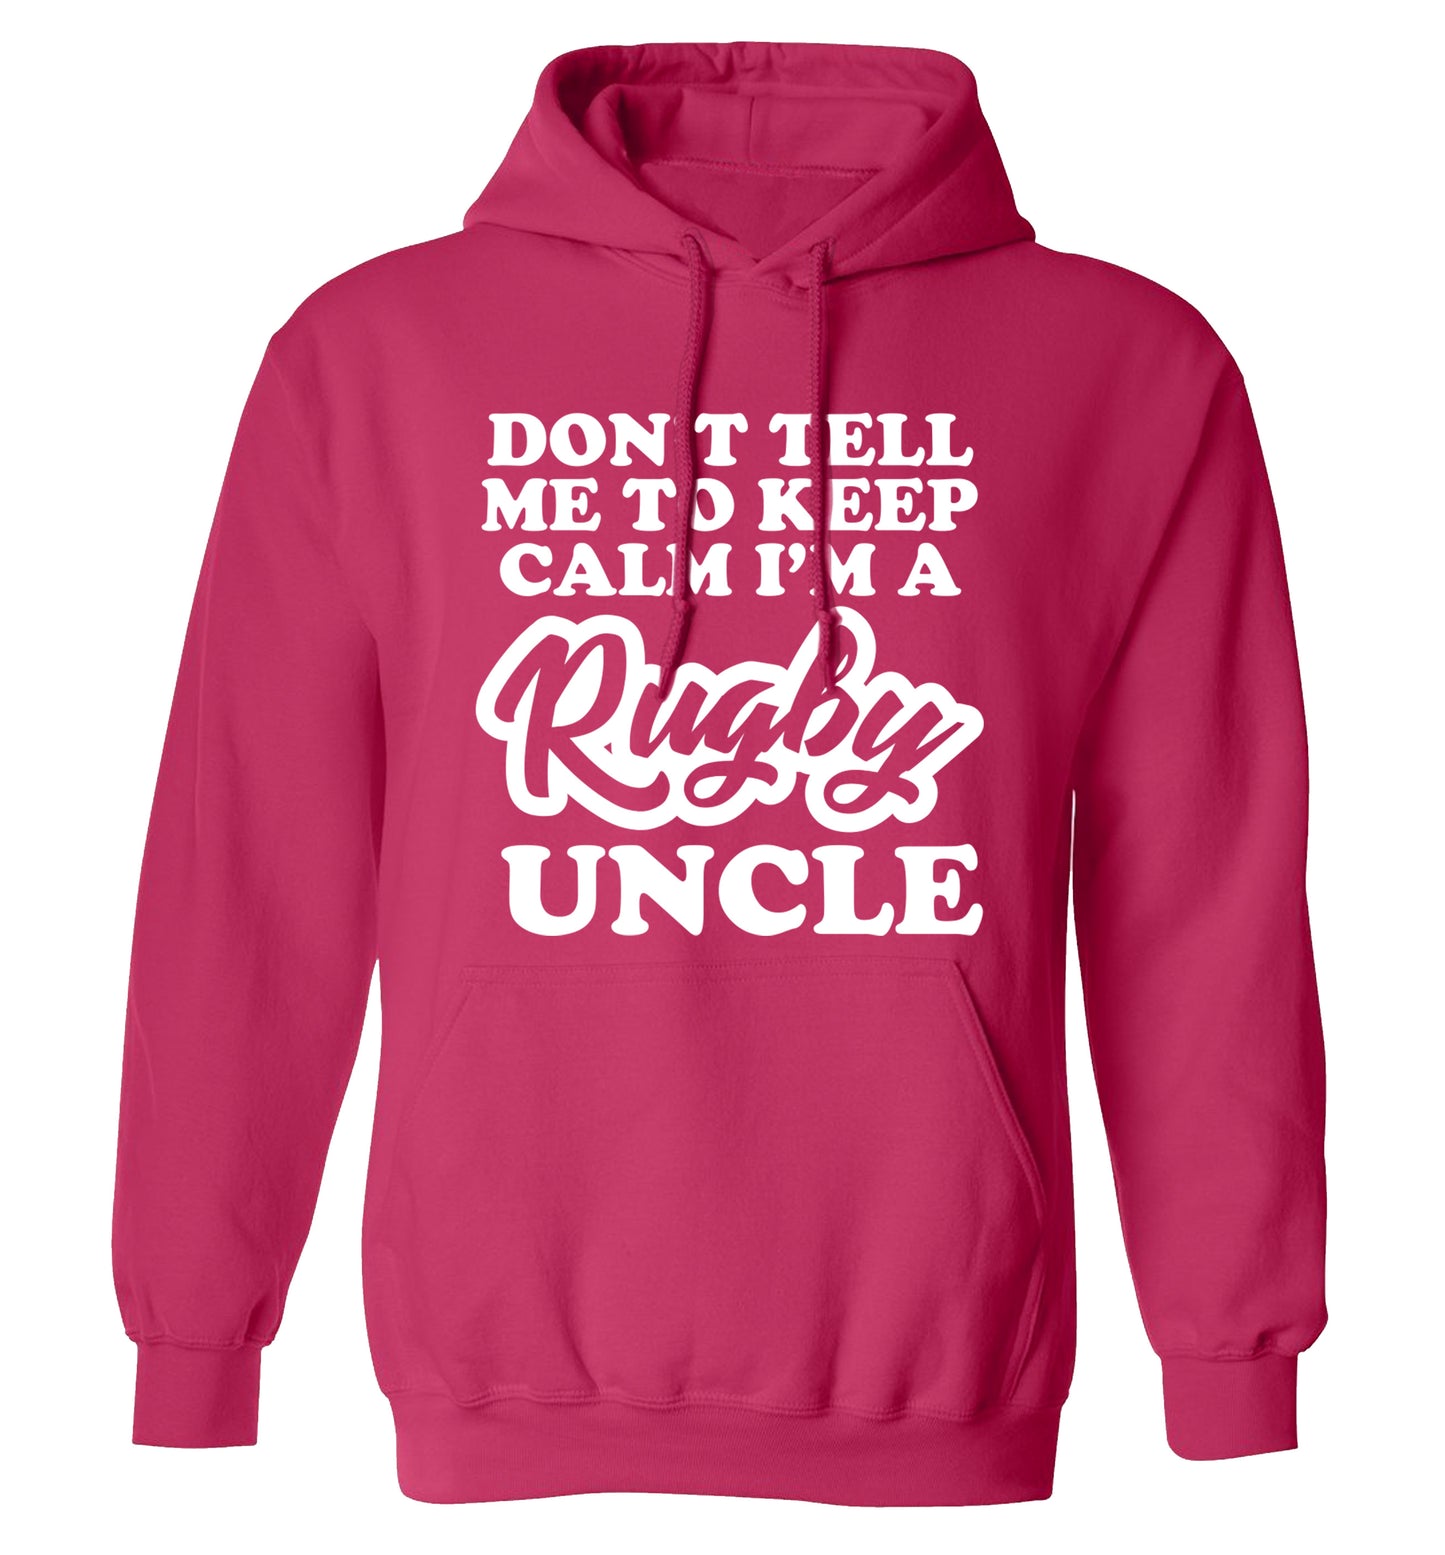 Don't tell me to keep calm I'm a rugby uncle adults unisex pink hoodie 2XL